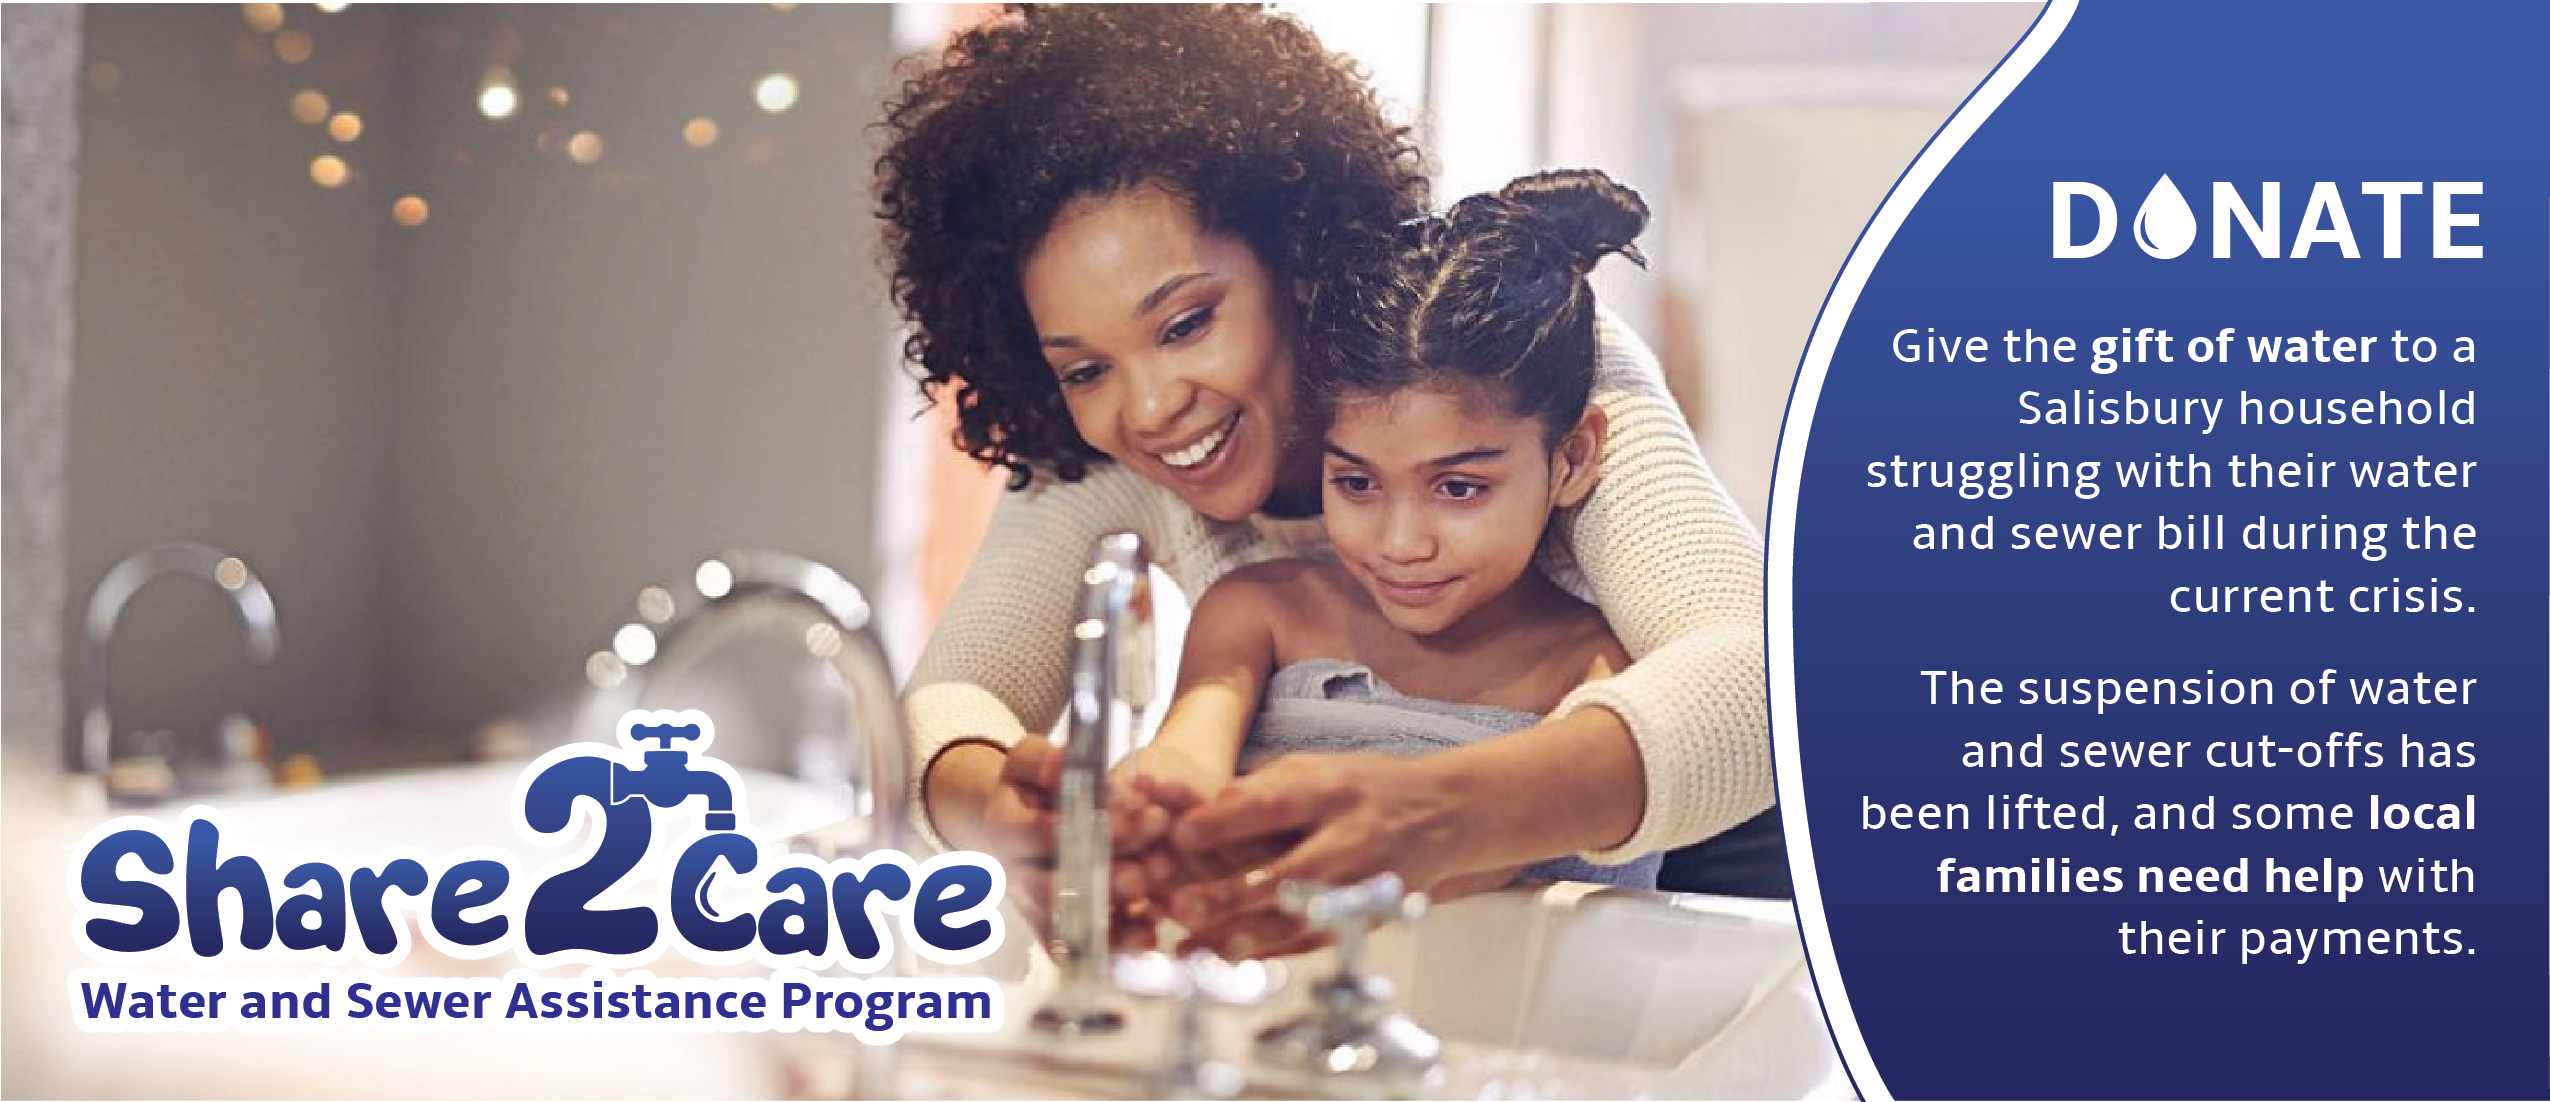 Share2Care program allows residents to donate money towards water and sewer funds to benefit local families in need